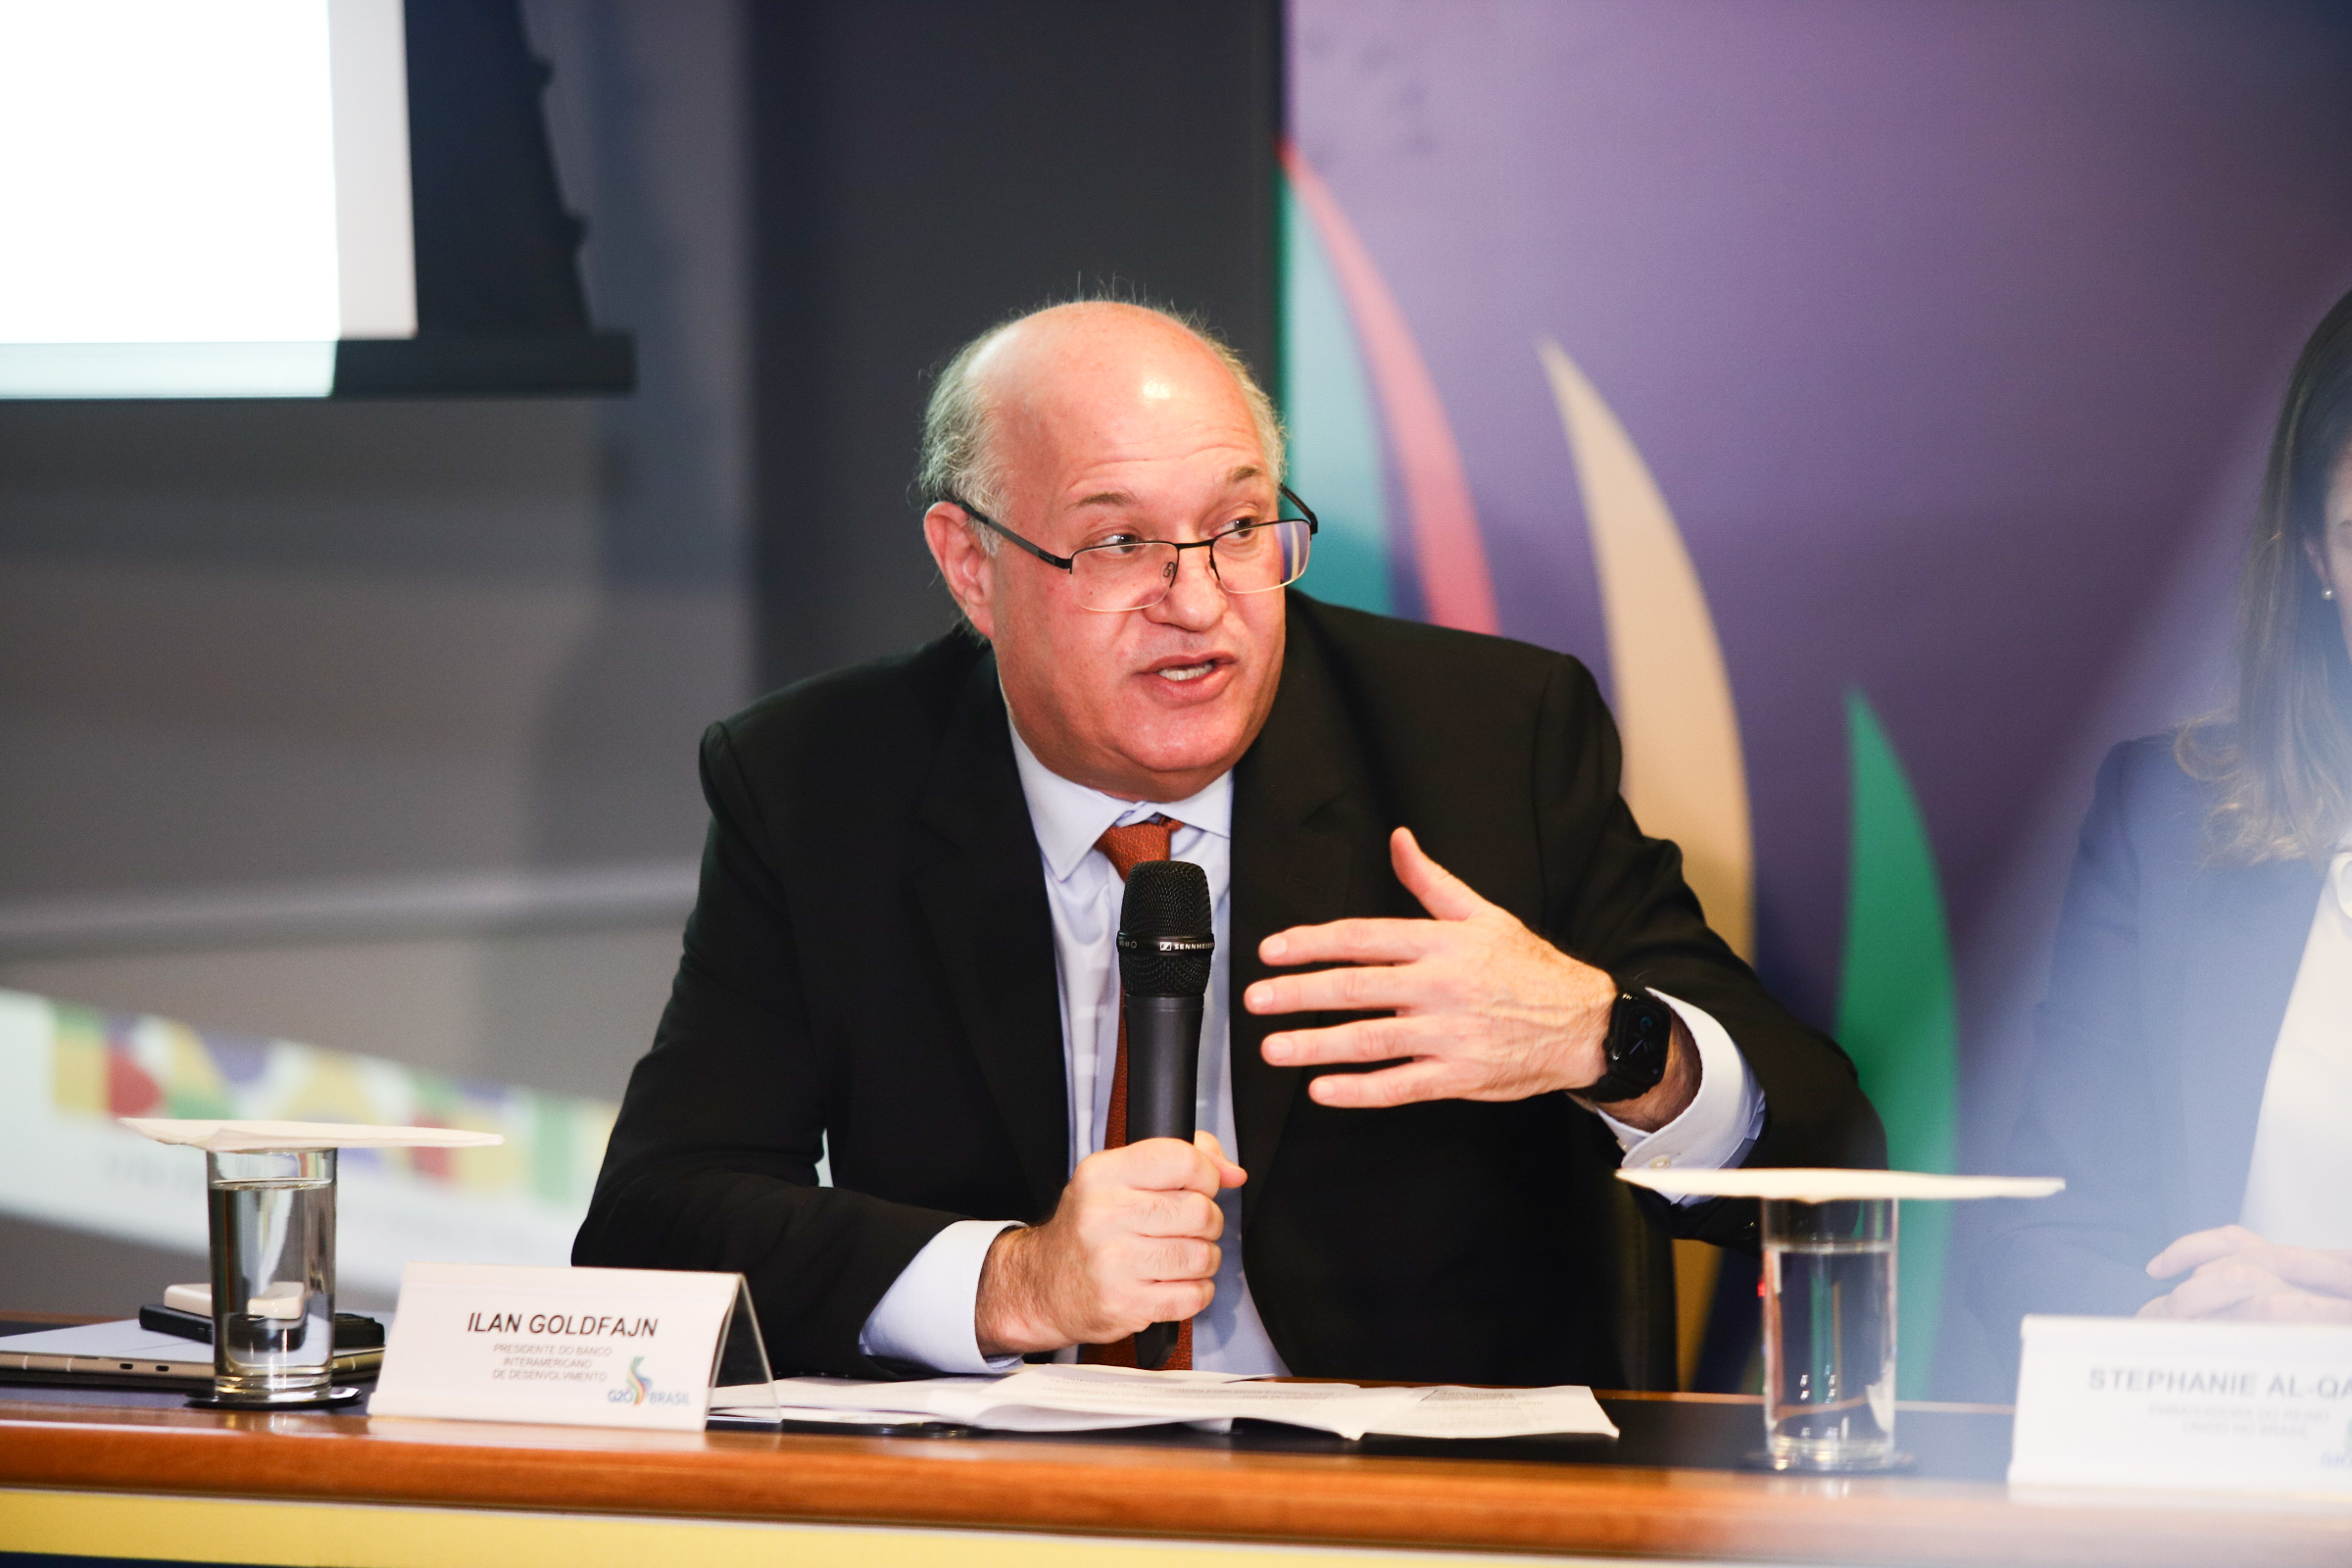 Ilan Goldfajn, the President of the IDB, posed critical questions: 'How many individuals have been lifted out of poverty through the loan funds? Have we effectively addressed inequality?' | Credit: Disclosure/Ricardo Valarini/IDB